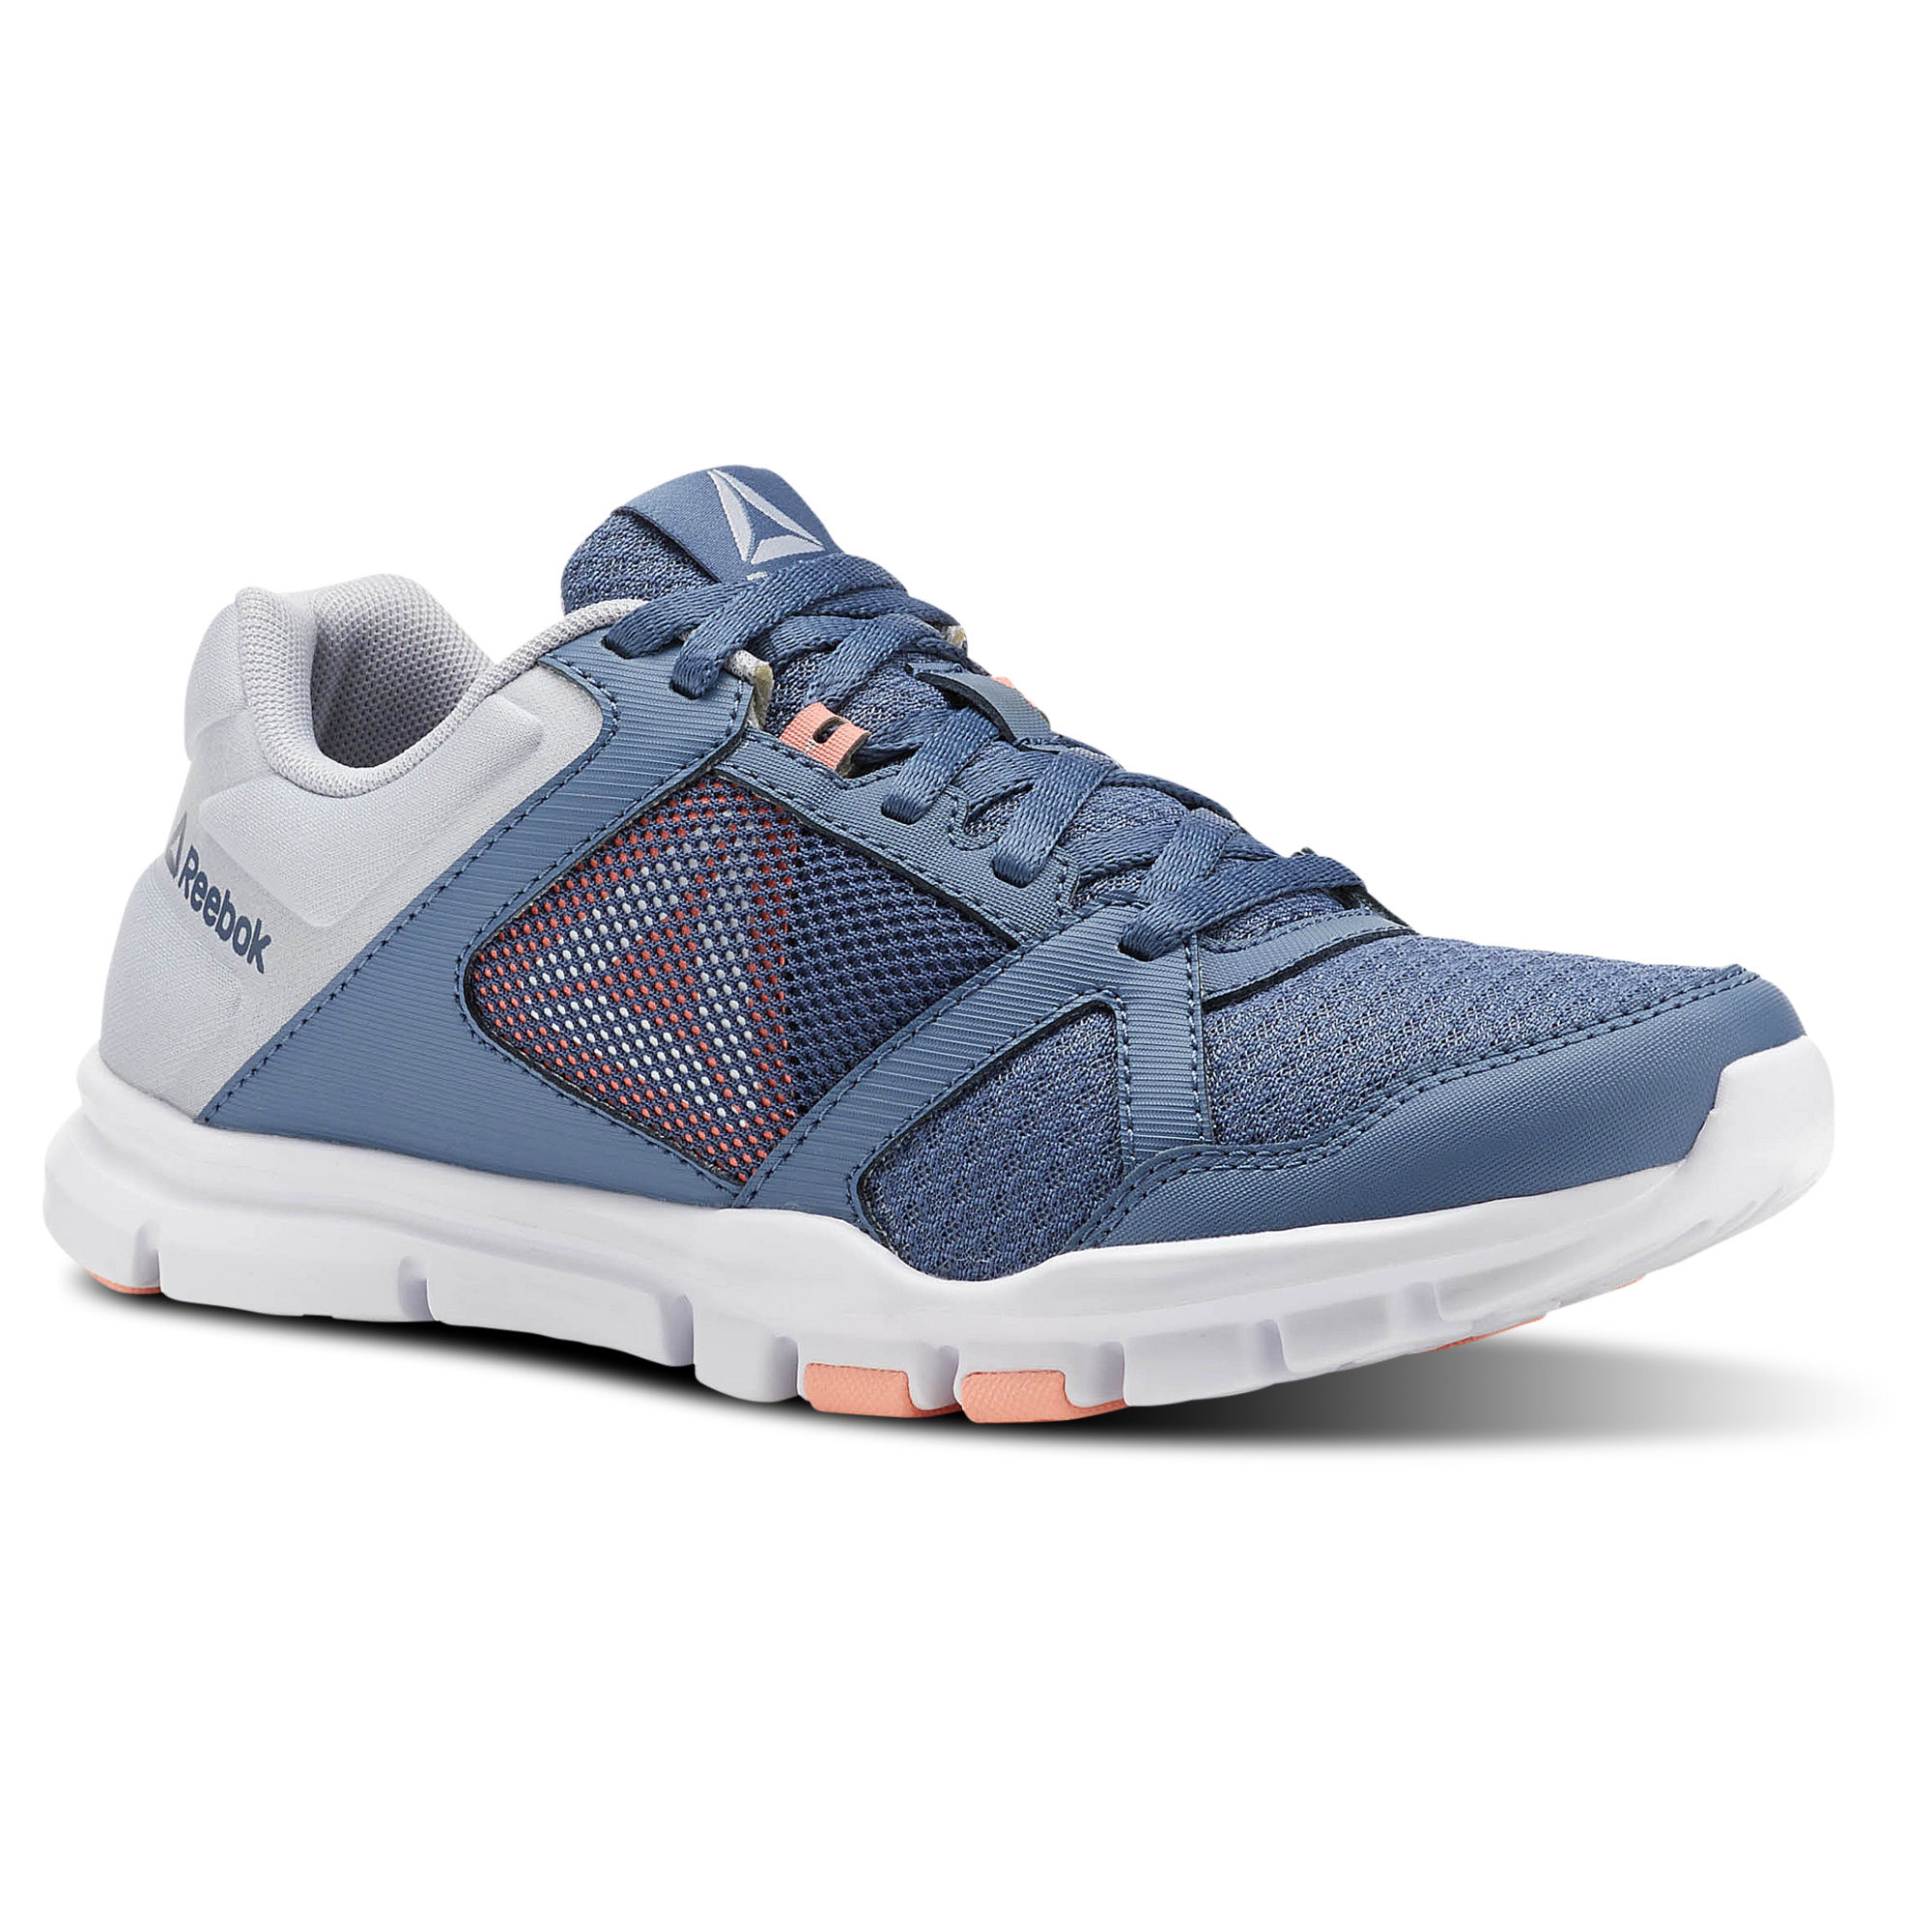 2 pair Reebok athletic shoes from $19 each at eBay